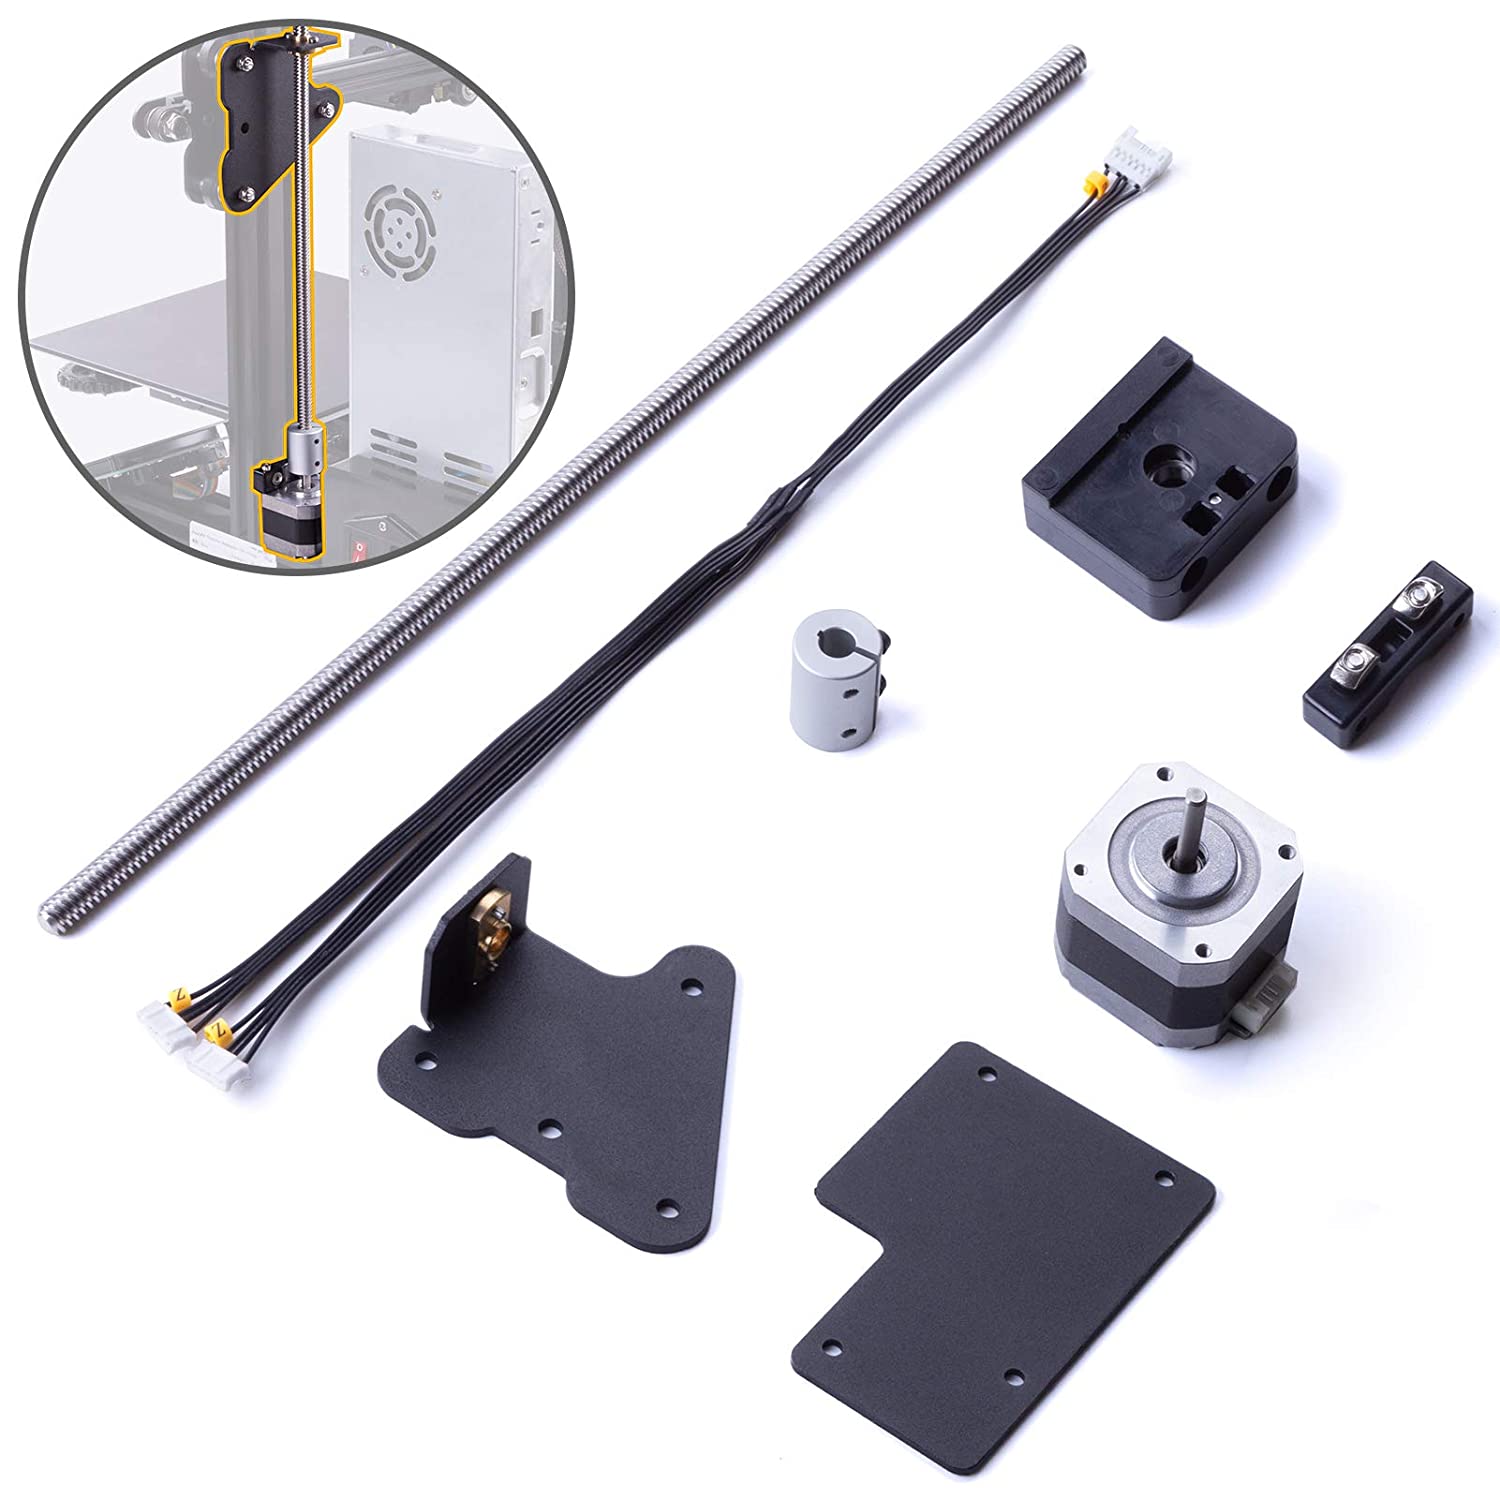 Creality Ender 3 / Pro / V2 Dual Z-axis Upgrade Kit with Dual Stepper Motors